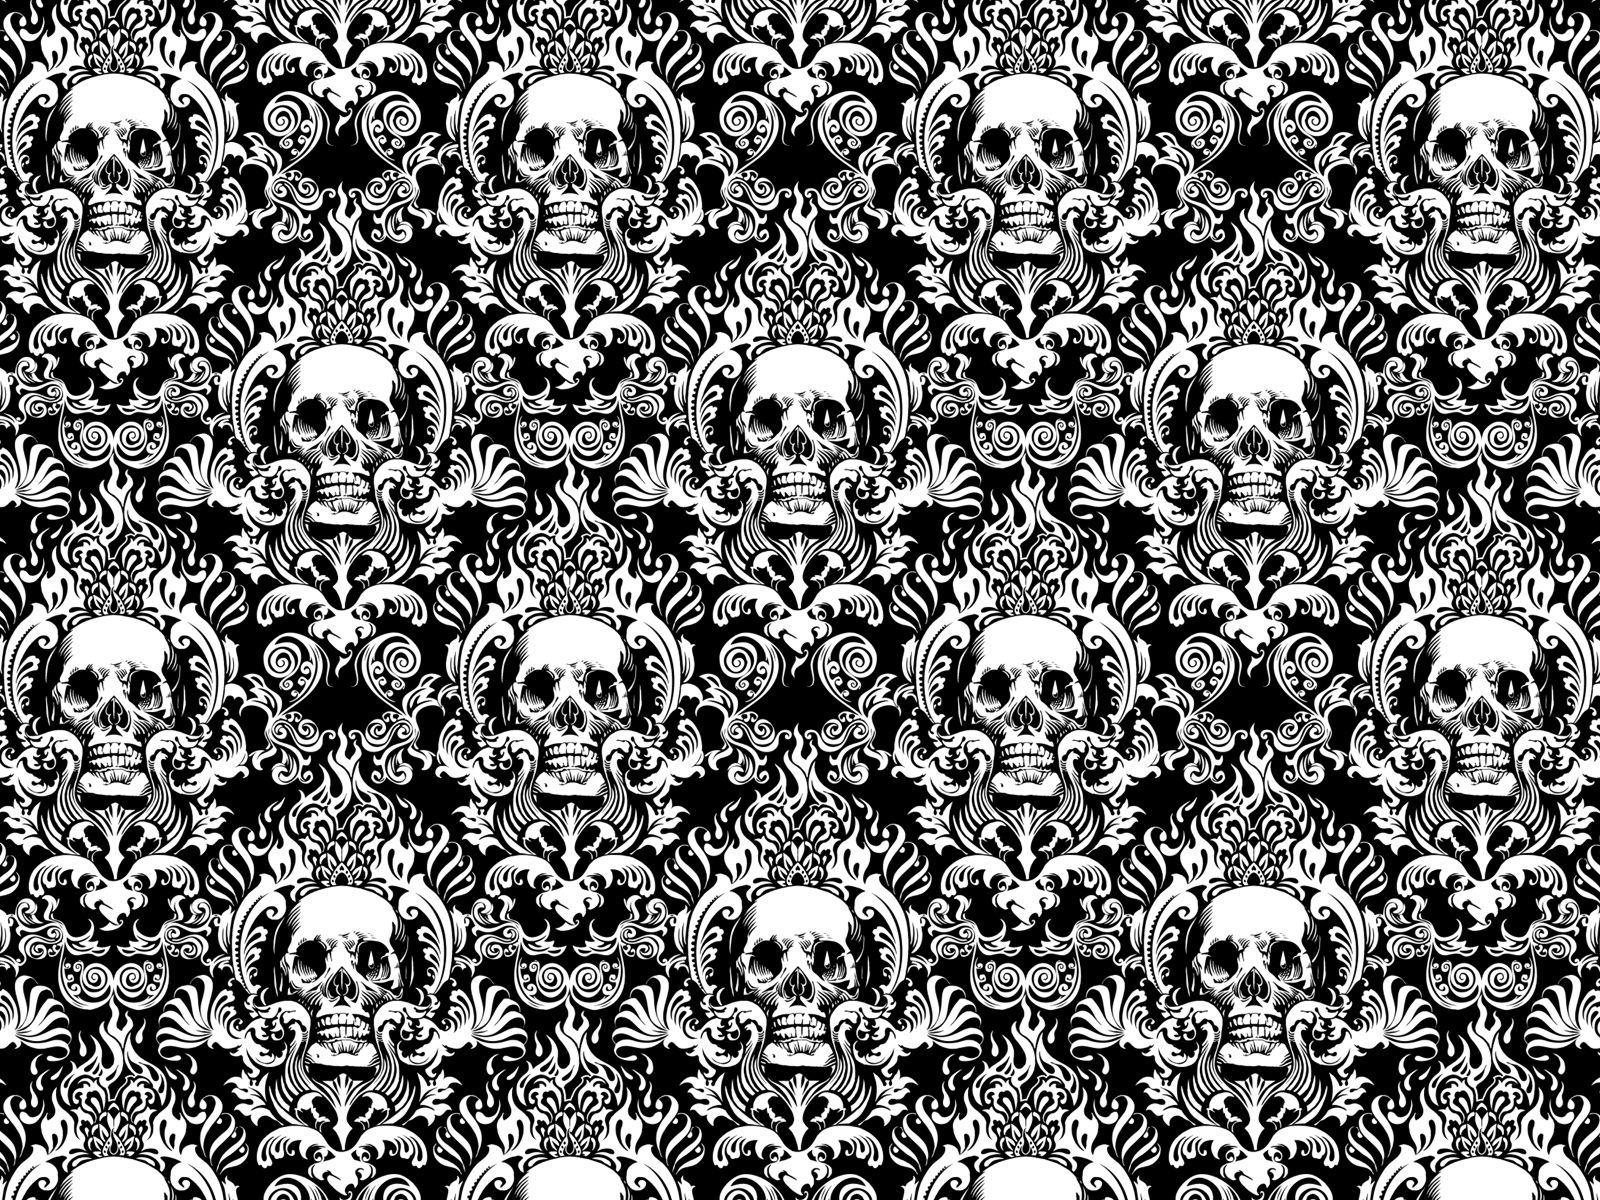 Jimiyo inspired by damask style wallpaper made one will Black 1600x1200